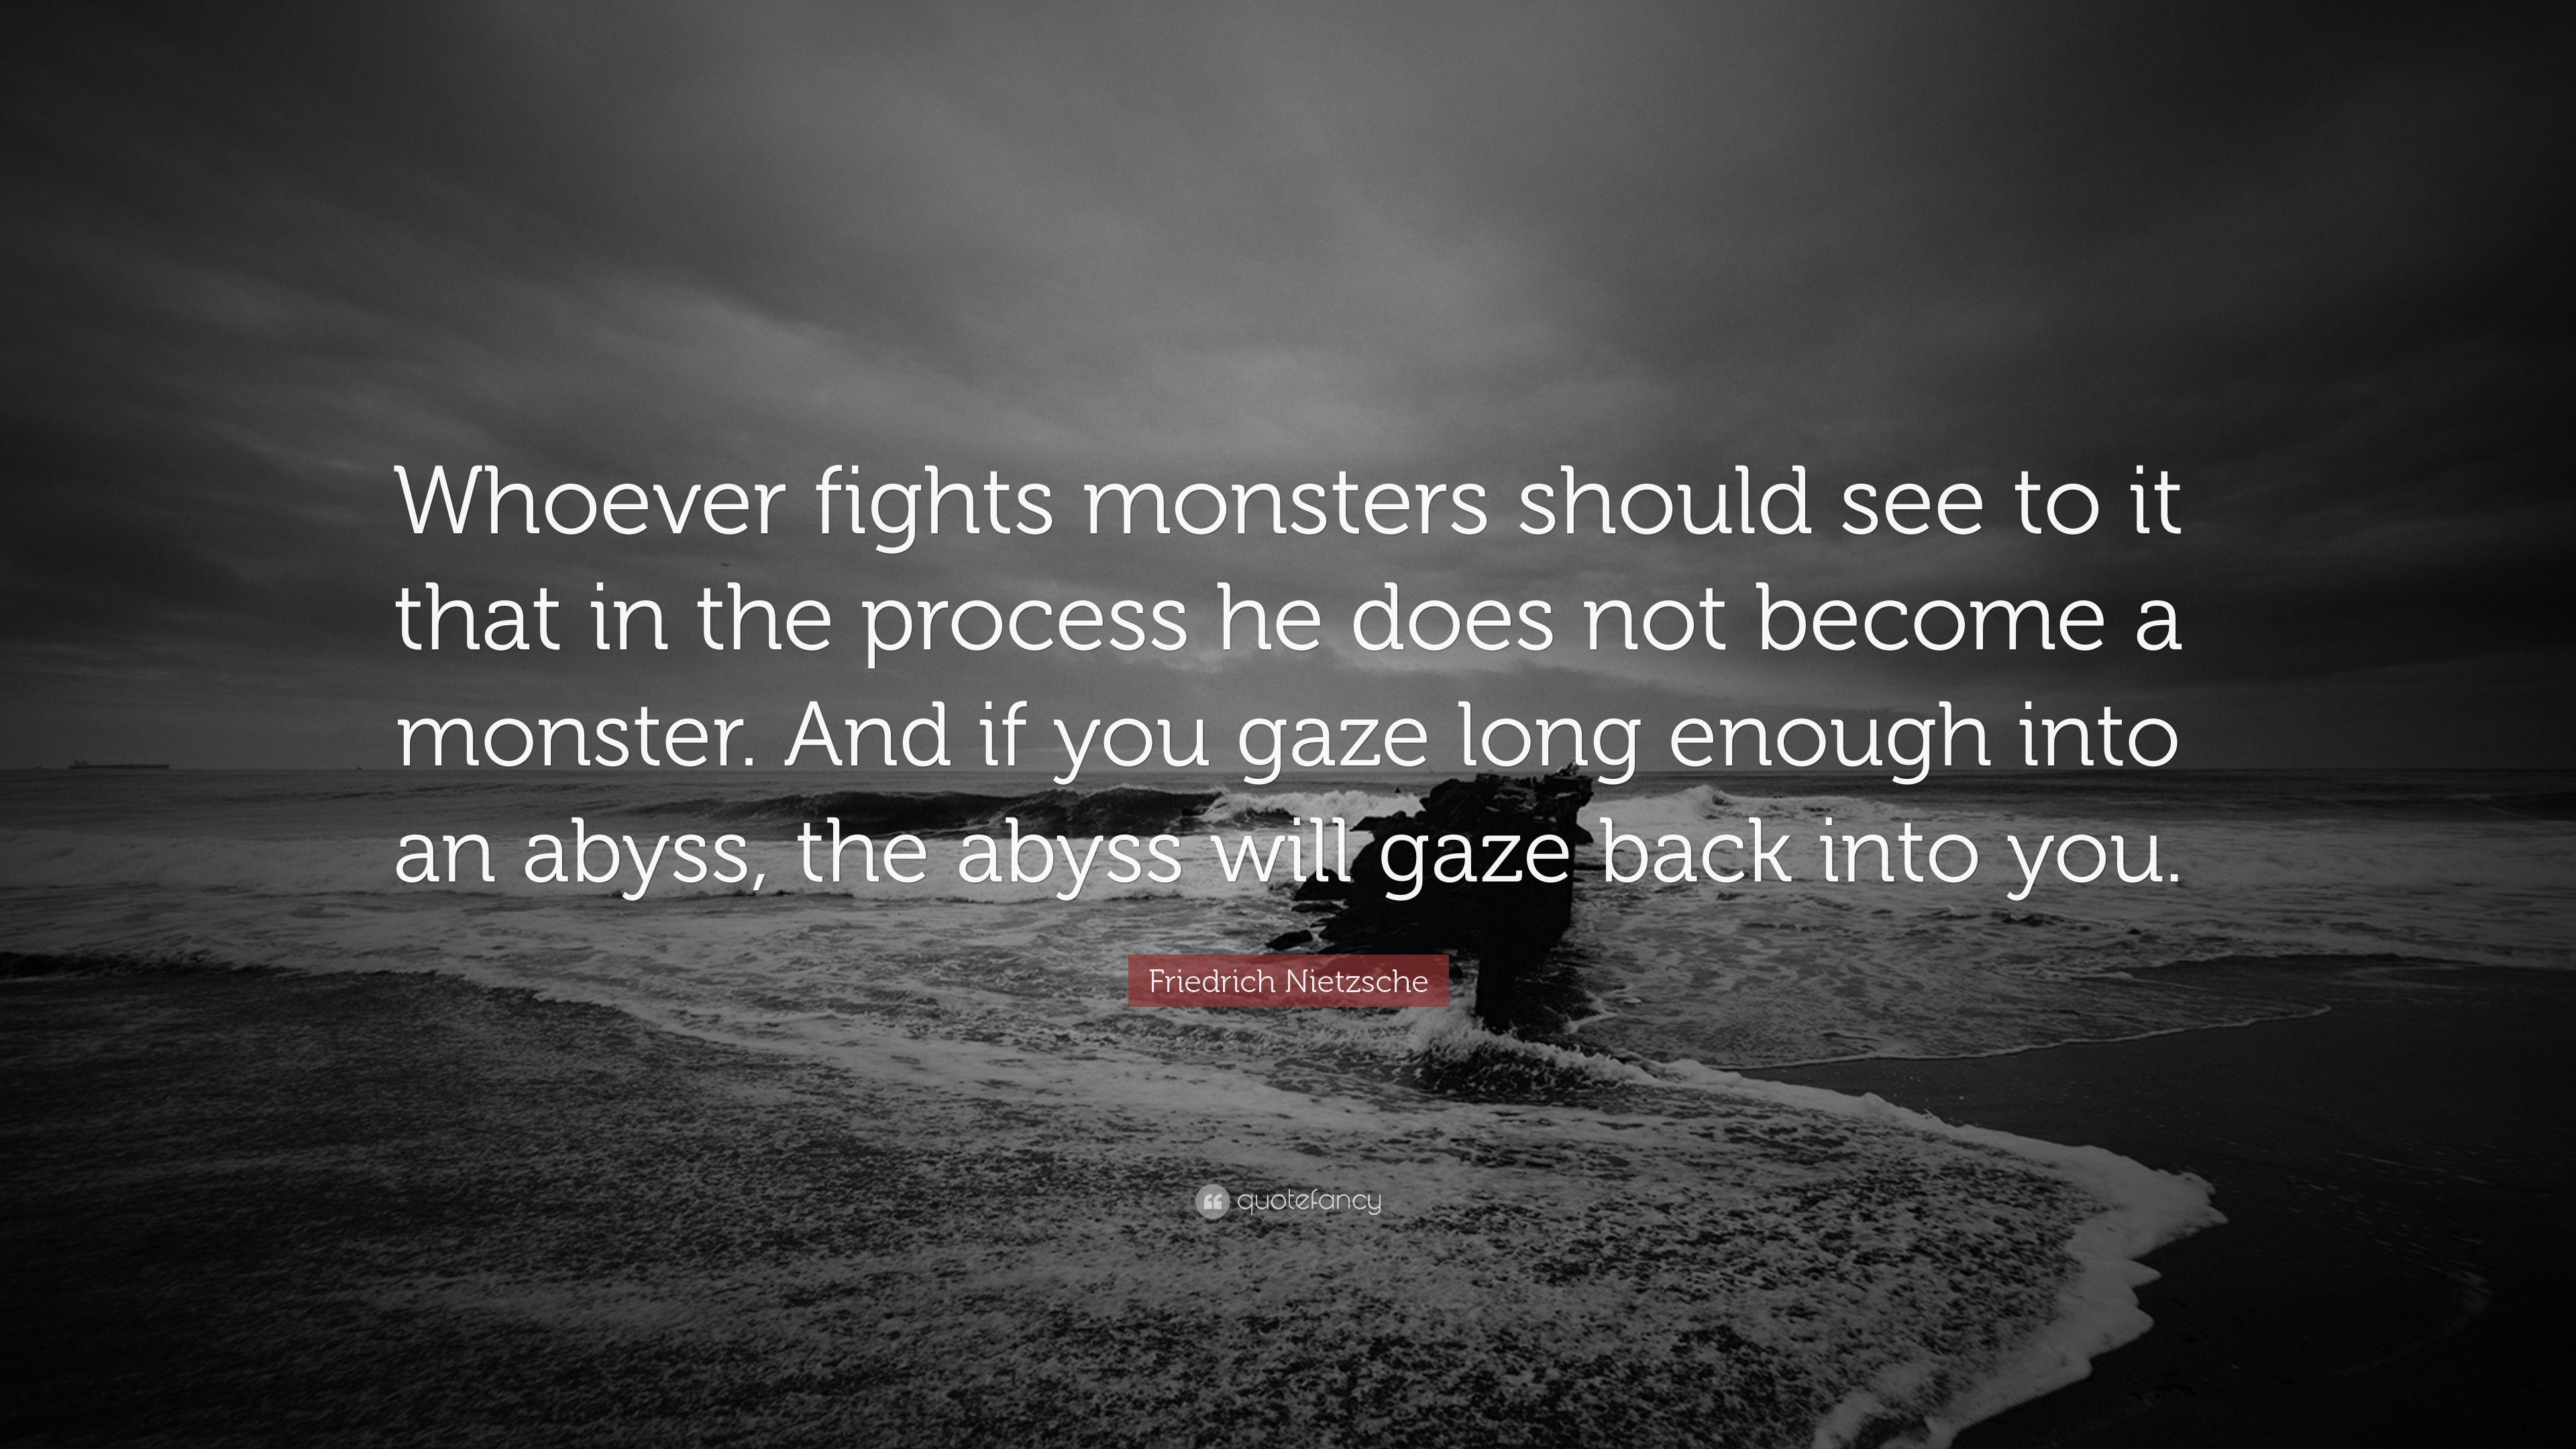 Friedrich Nietzsche Quote: “Whoever fights monsters should see to